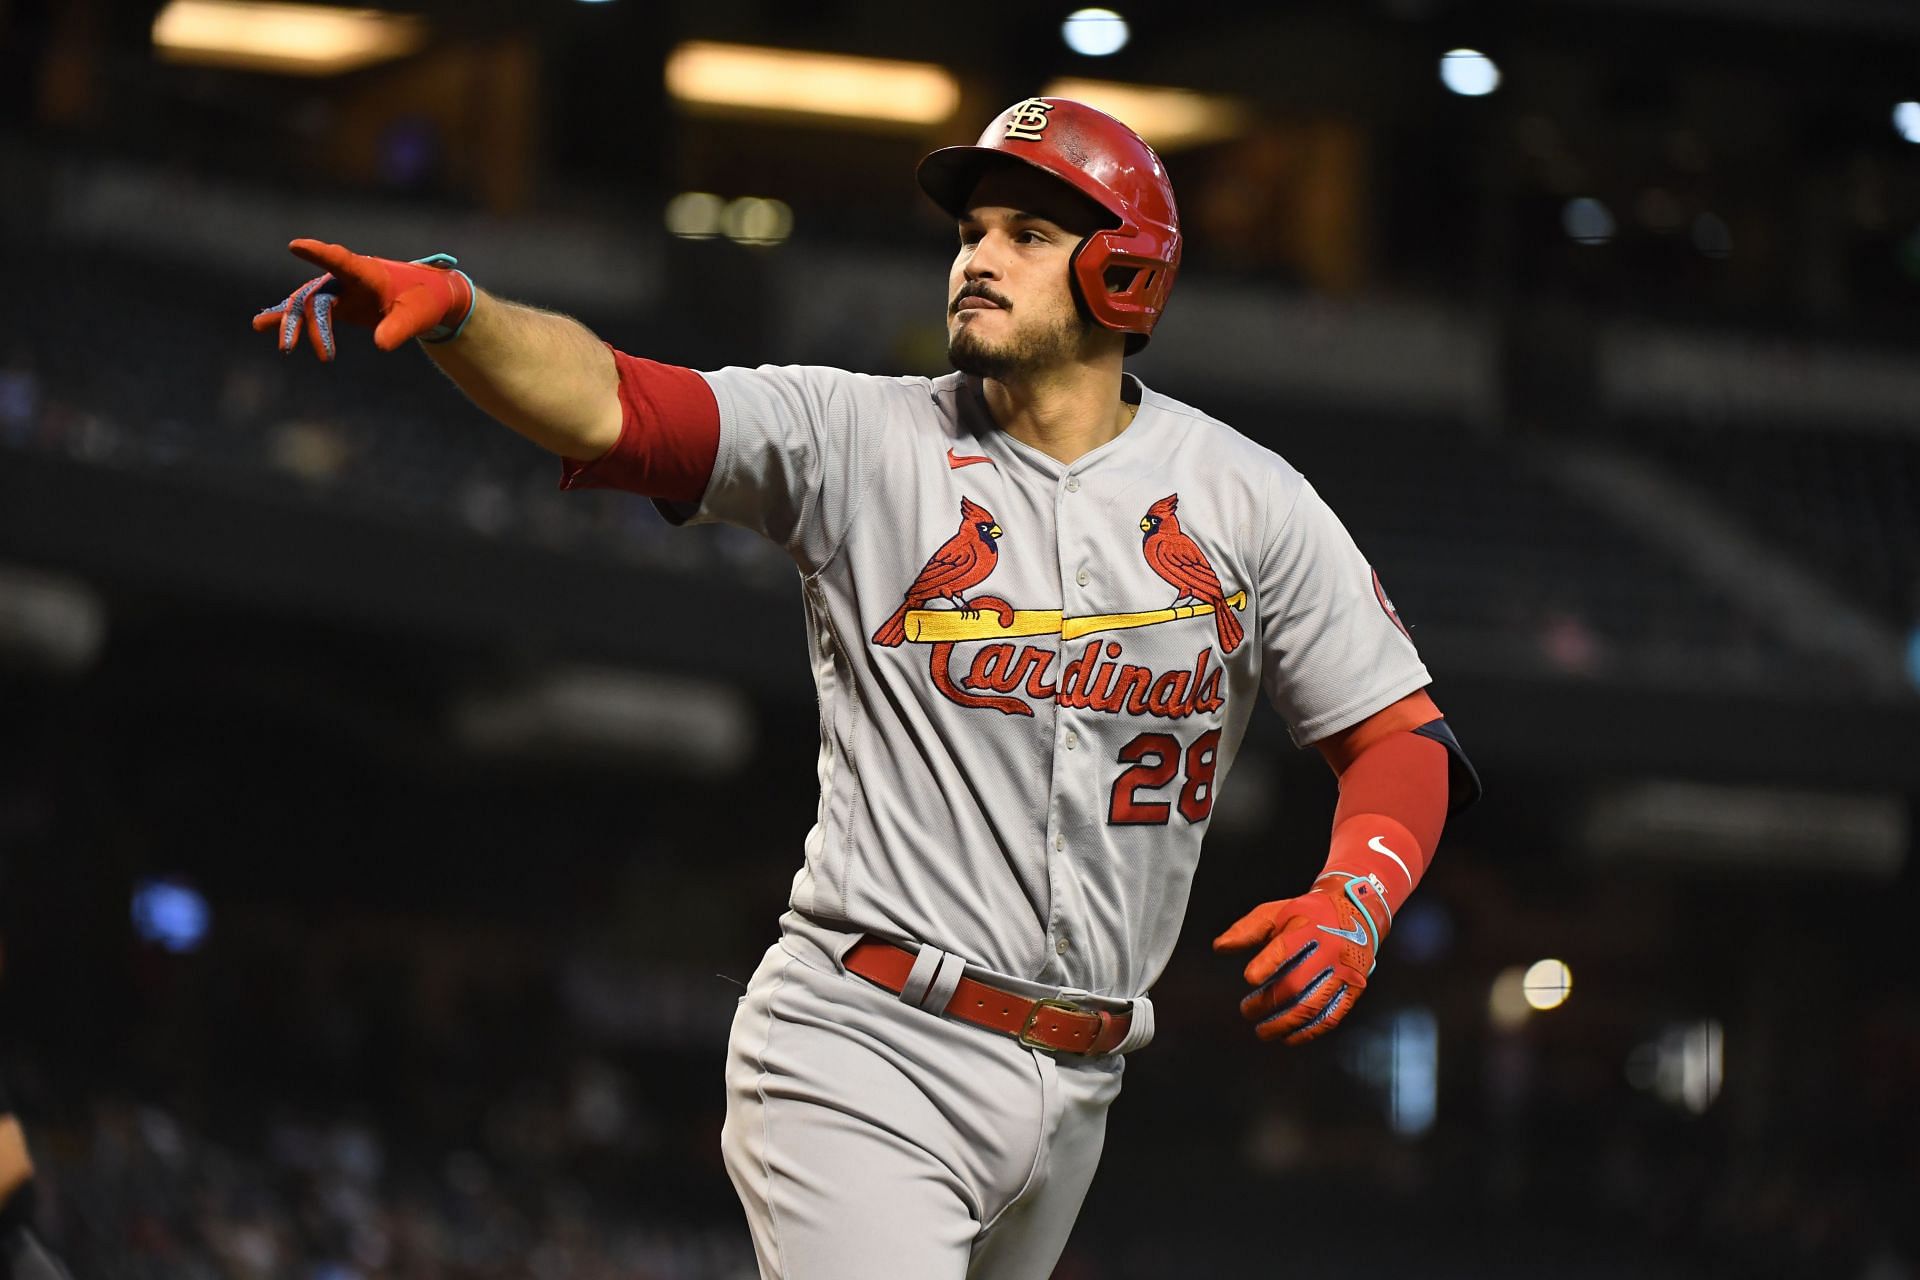 Nolan Arenado of St Louis Cardinals gestures after hitting a solo home run off Madison Bumgarner of Arizona Diamondbacks at Chase Field in Phoenix, Arizona (Photo by Norm Hall/Getty Images)